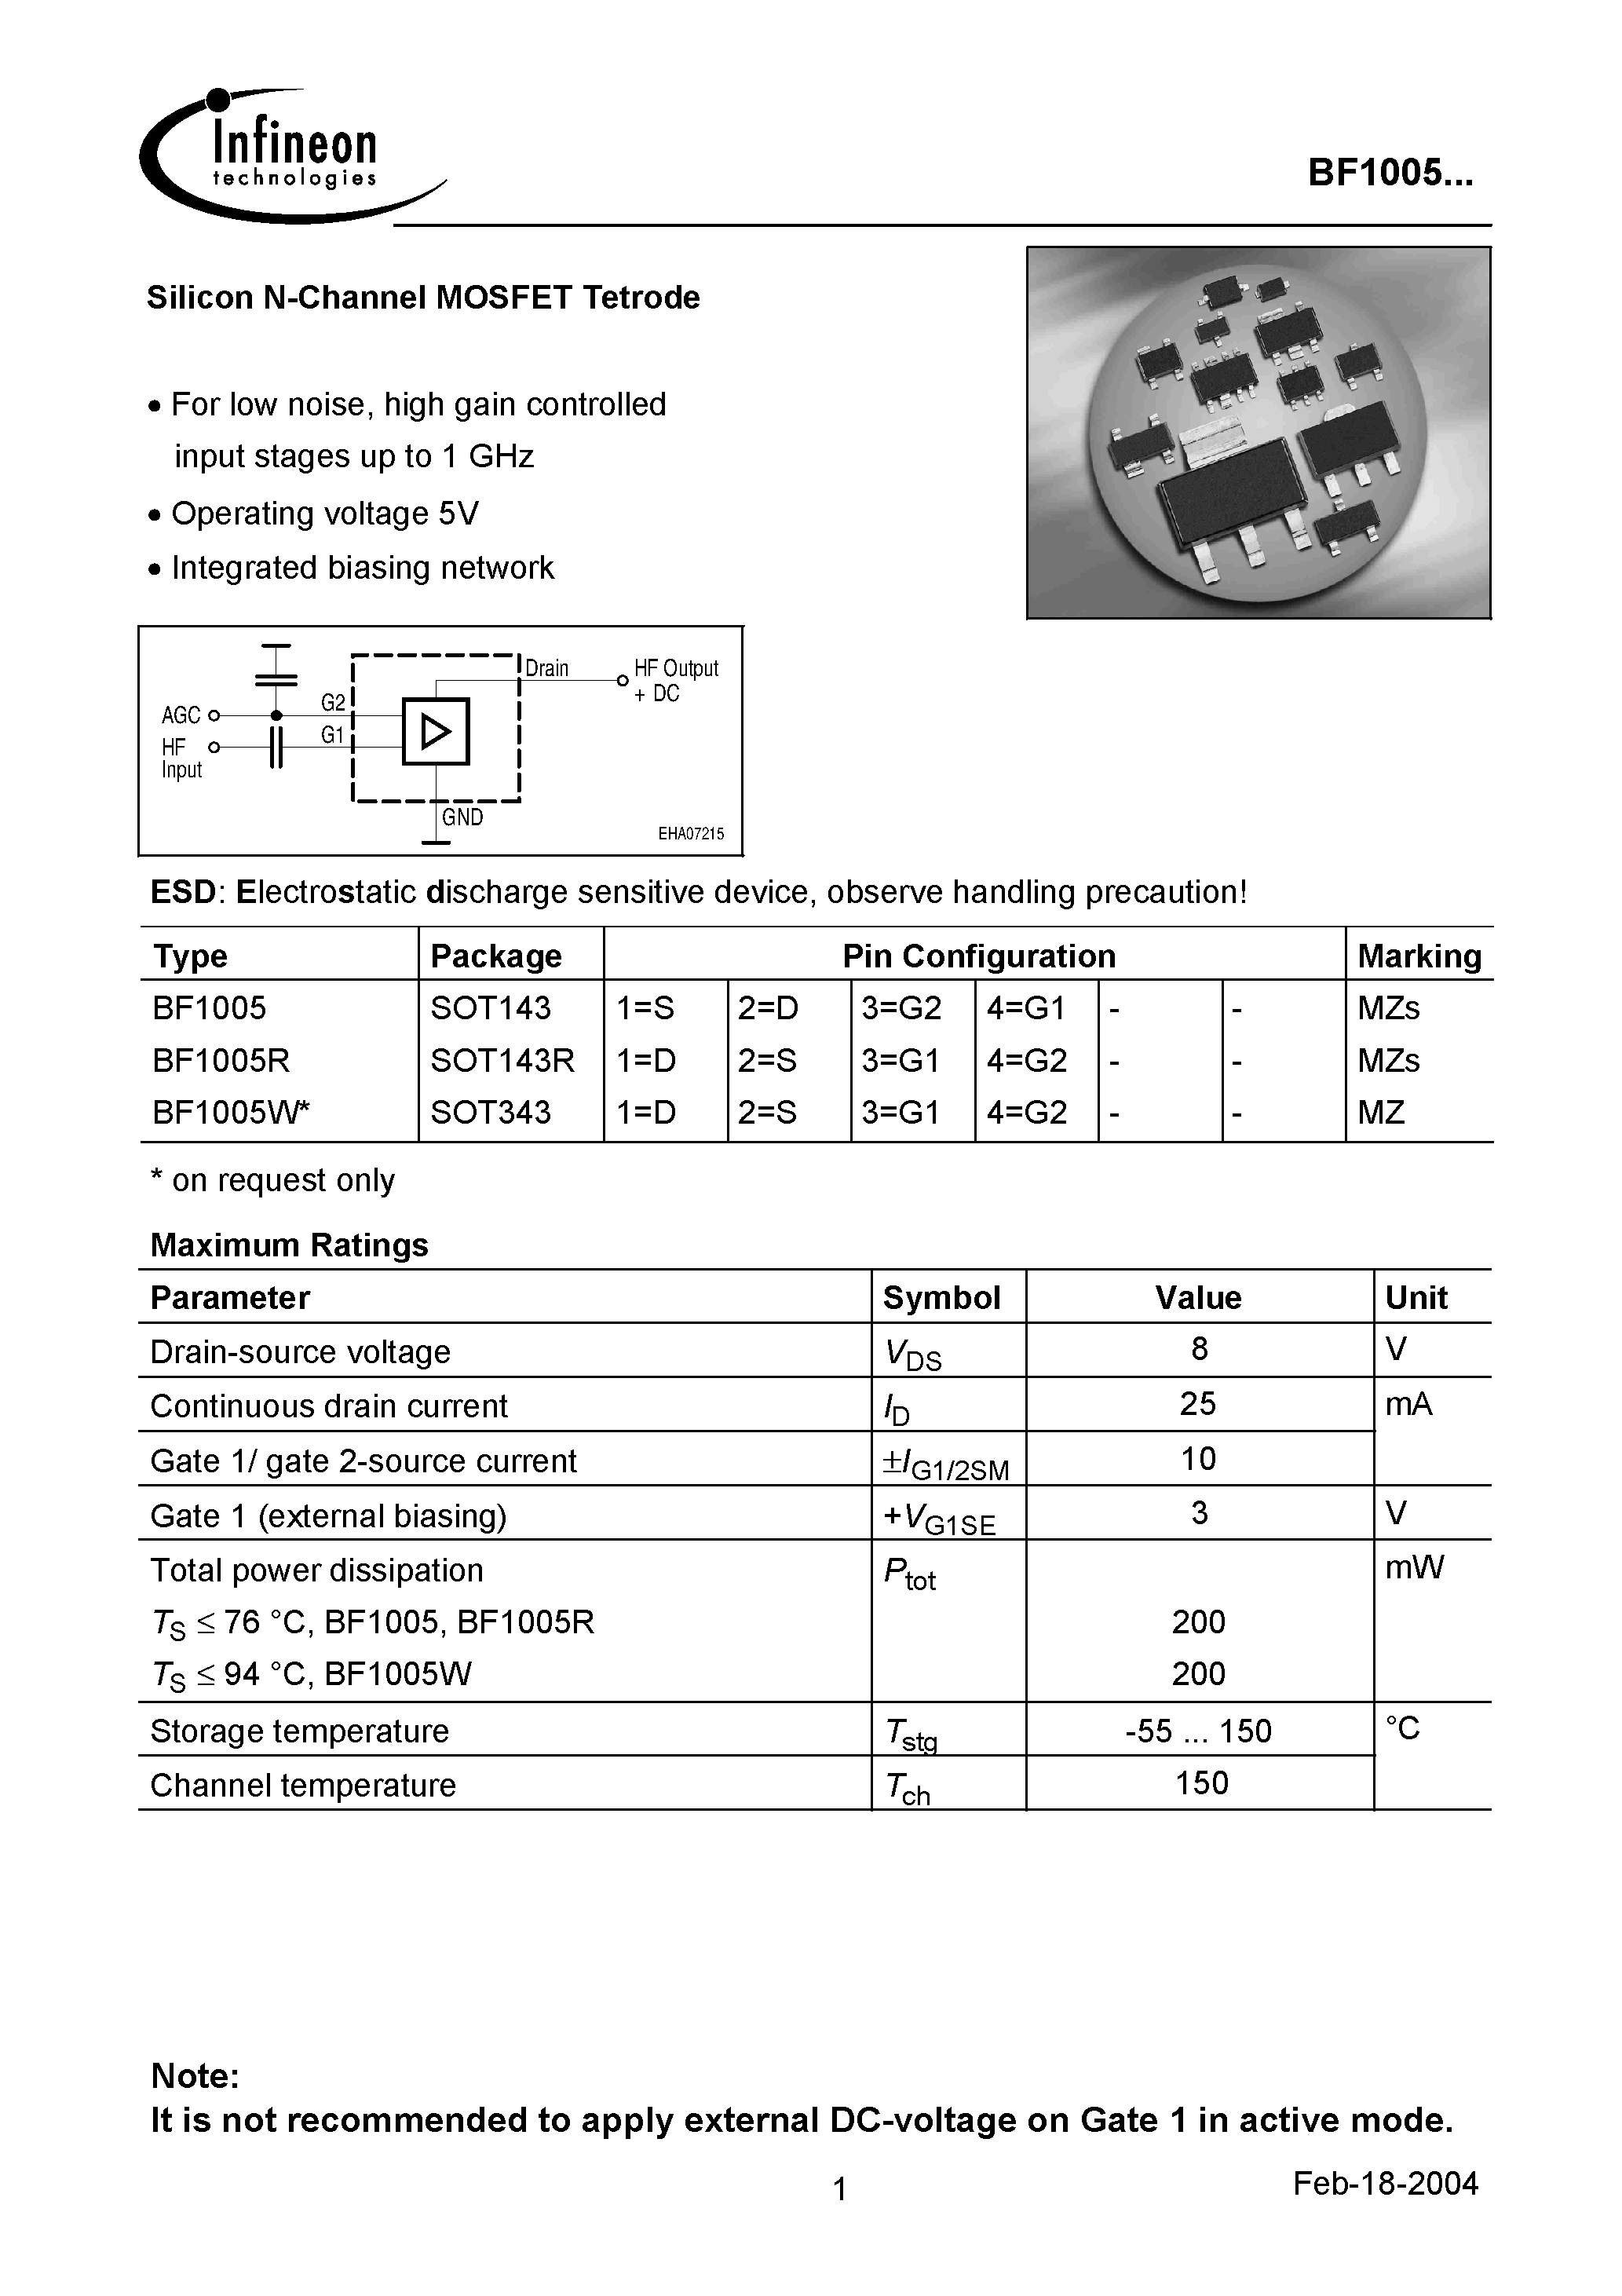 Даташит BF1005W - Silicon N-Channel MOSFET Tetrode страница 1